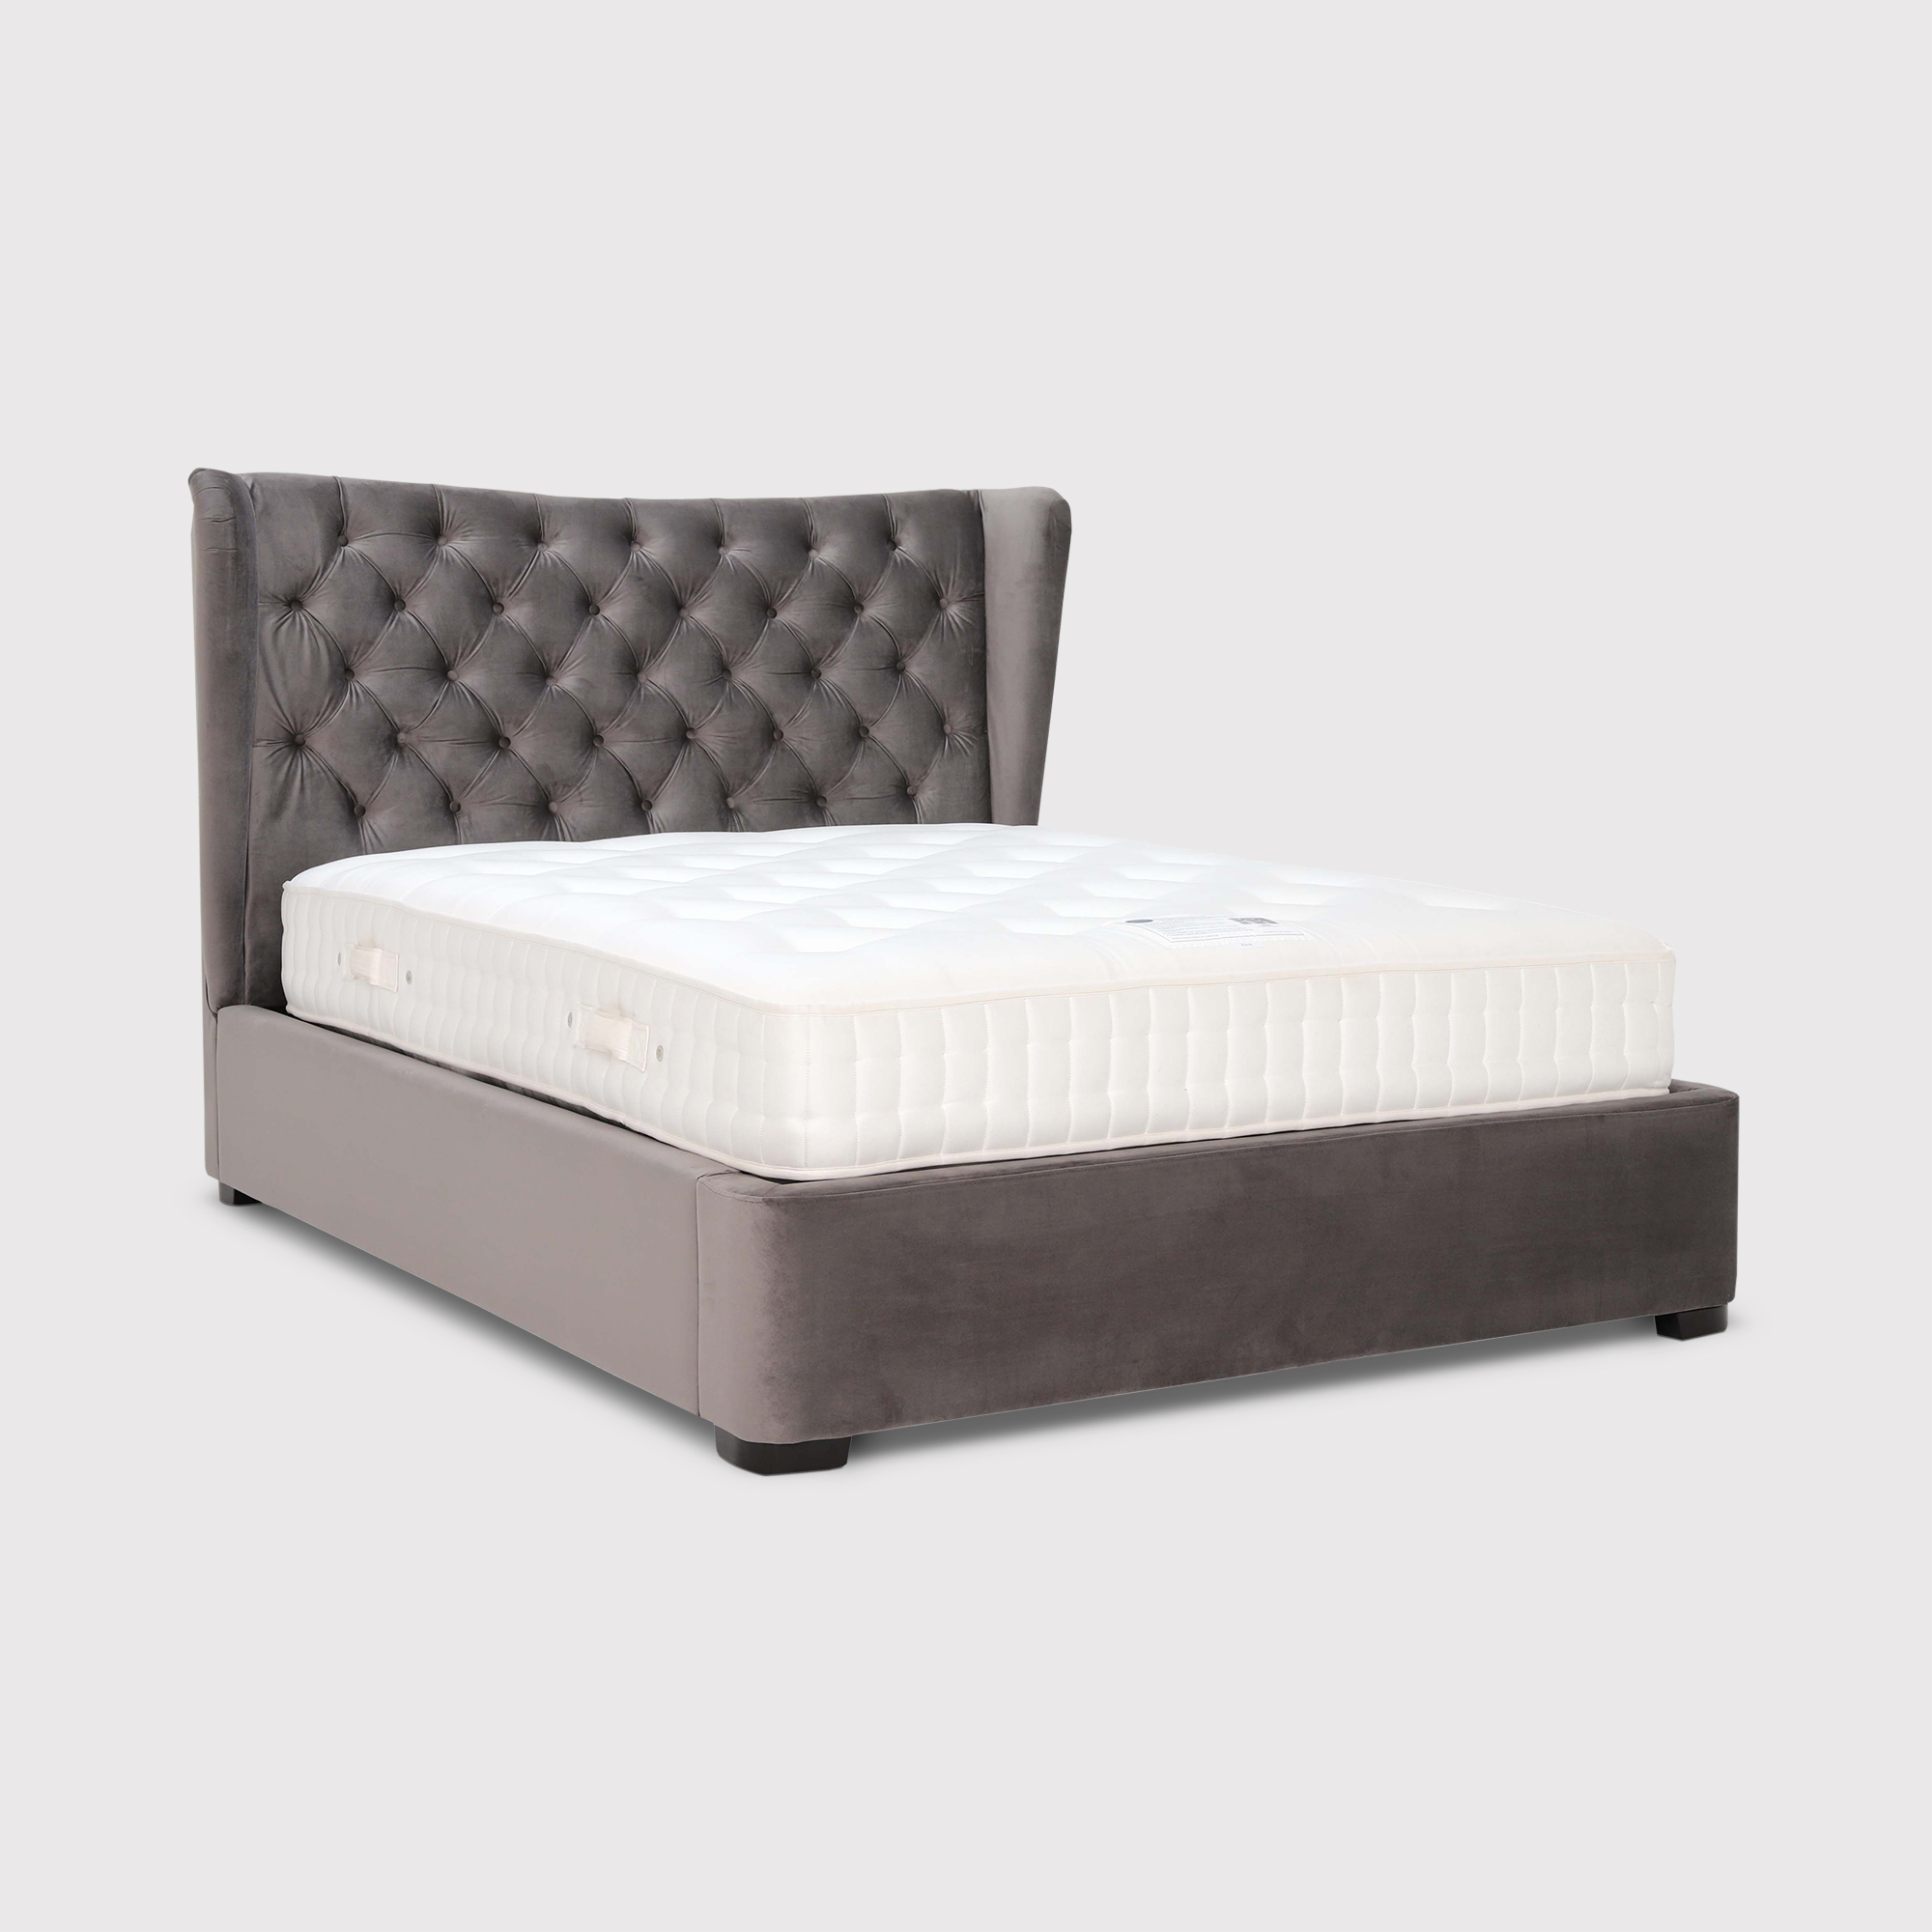 Sojourn 180cm Bed With Lift Up, Grey | Super King | Barker & Stonehouse